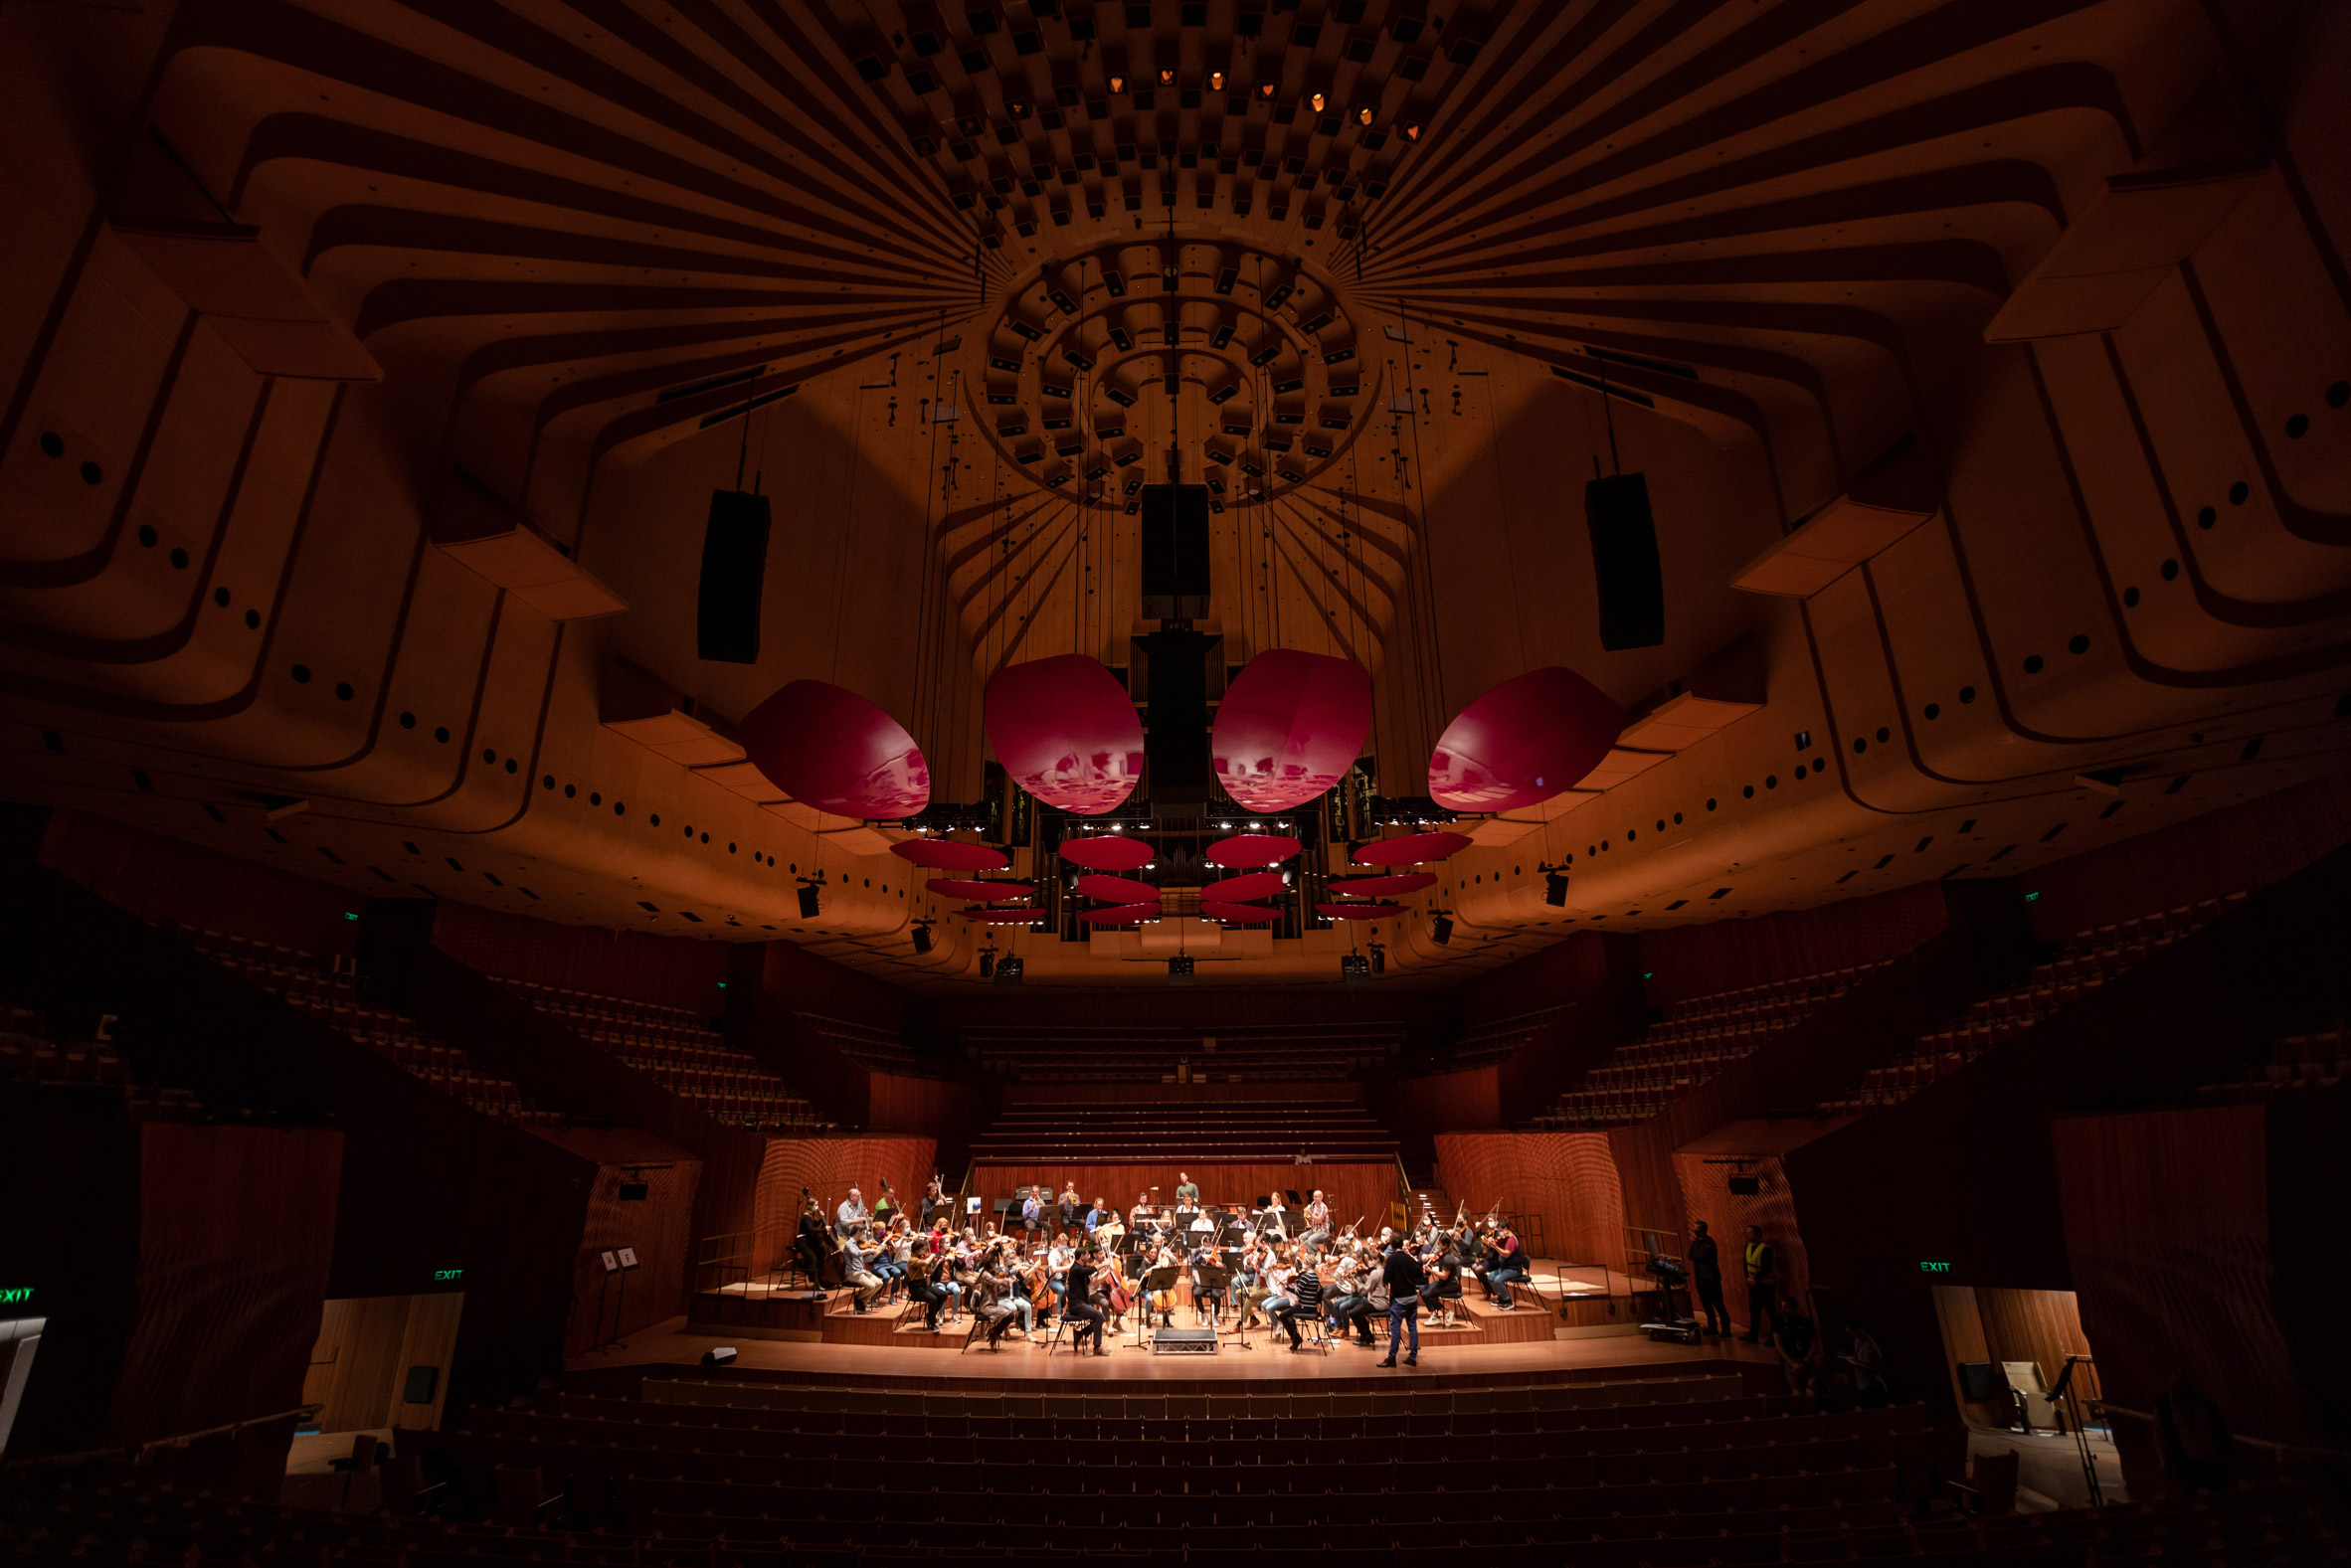 Orchestra rehearsing in an empty concert hall